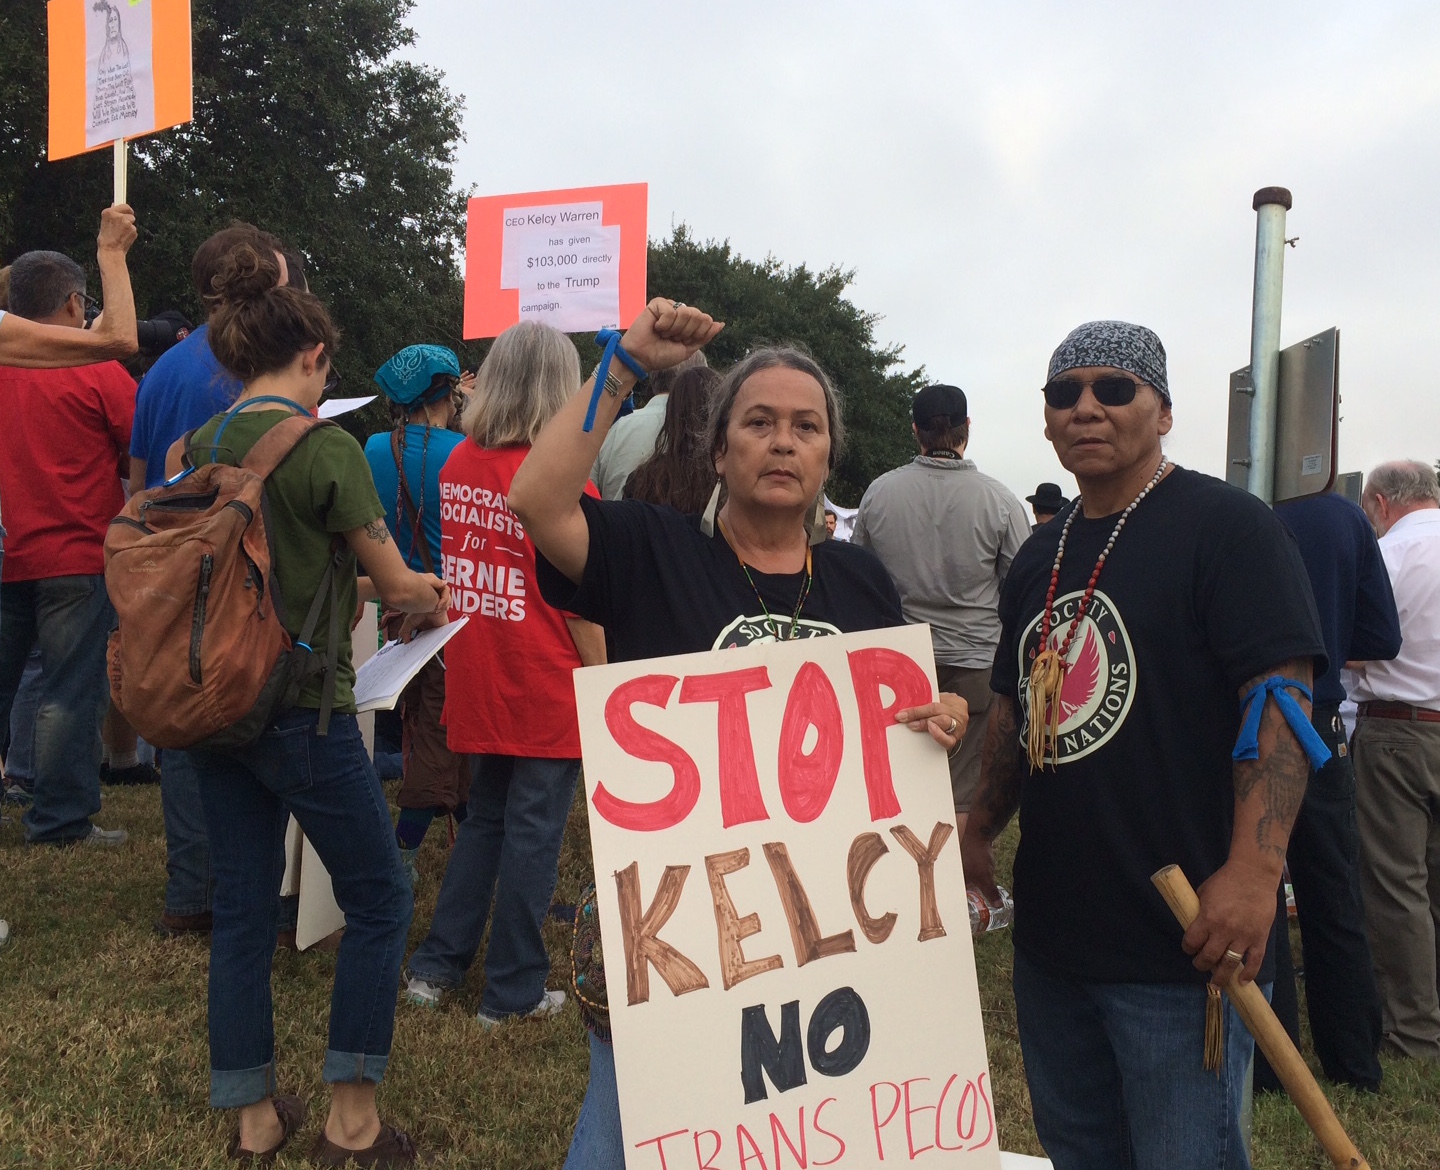 Jacalyn Hagans and Pete Hefflin, members of the Society of Native Nations, say Kelcy Warren has a conflict of interest and should recuse himself from the Texas Parks and Wildlife Department commission.